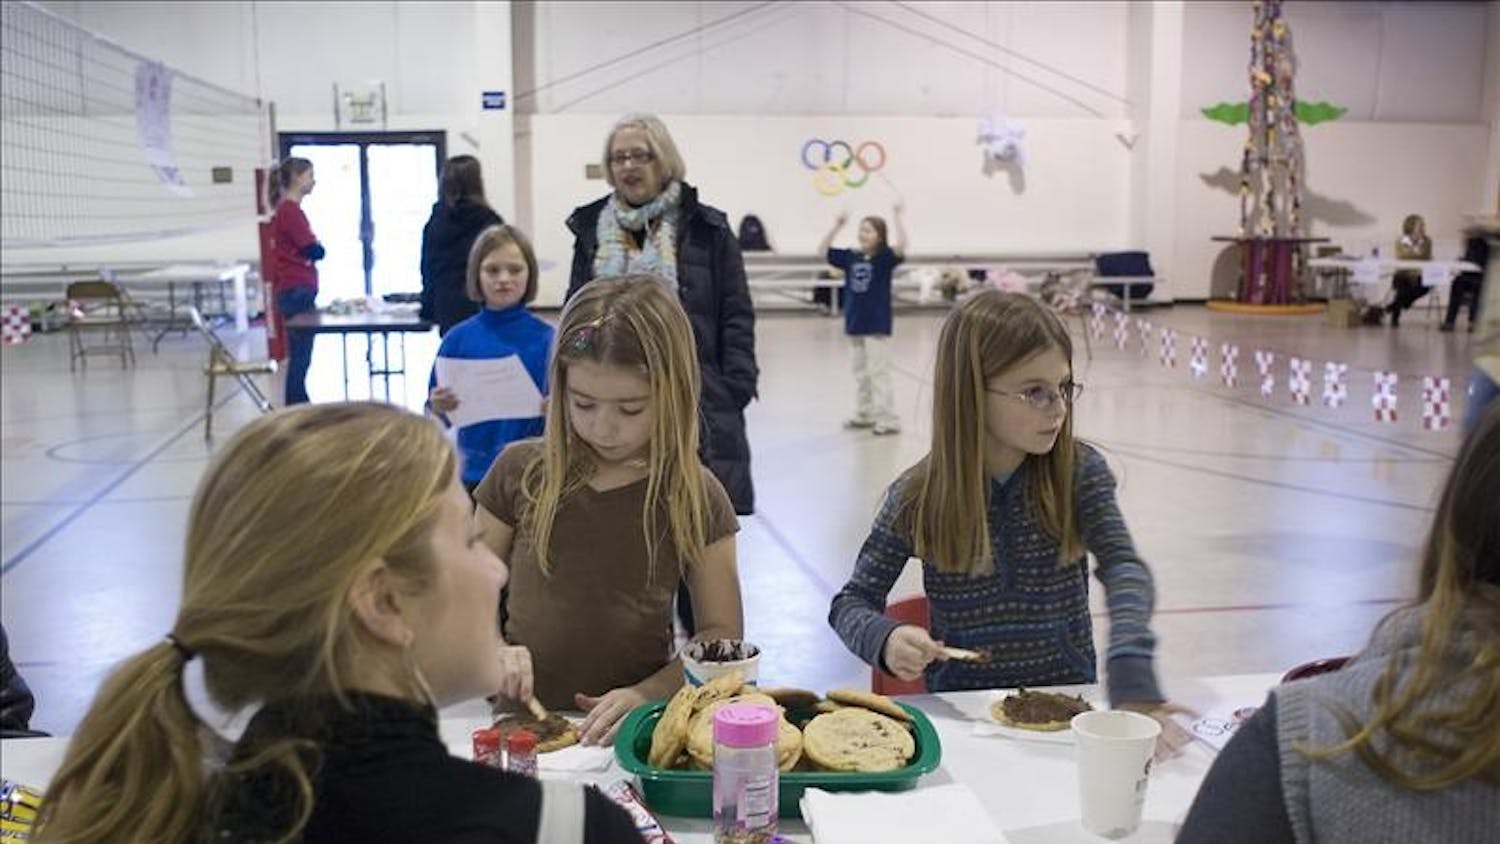 Members of Girls Inc. decorate cookies at the Chocolate Olympics Wednesday Evening.